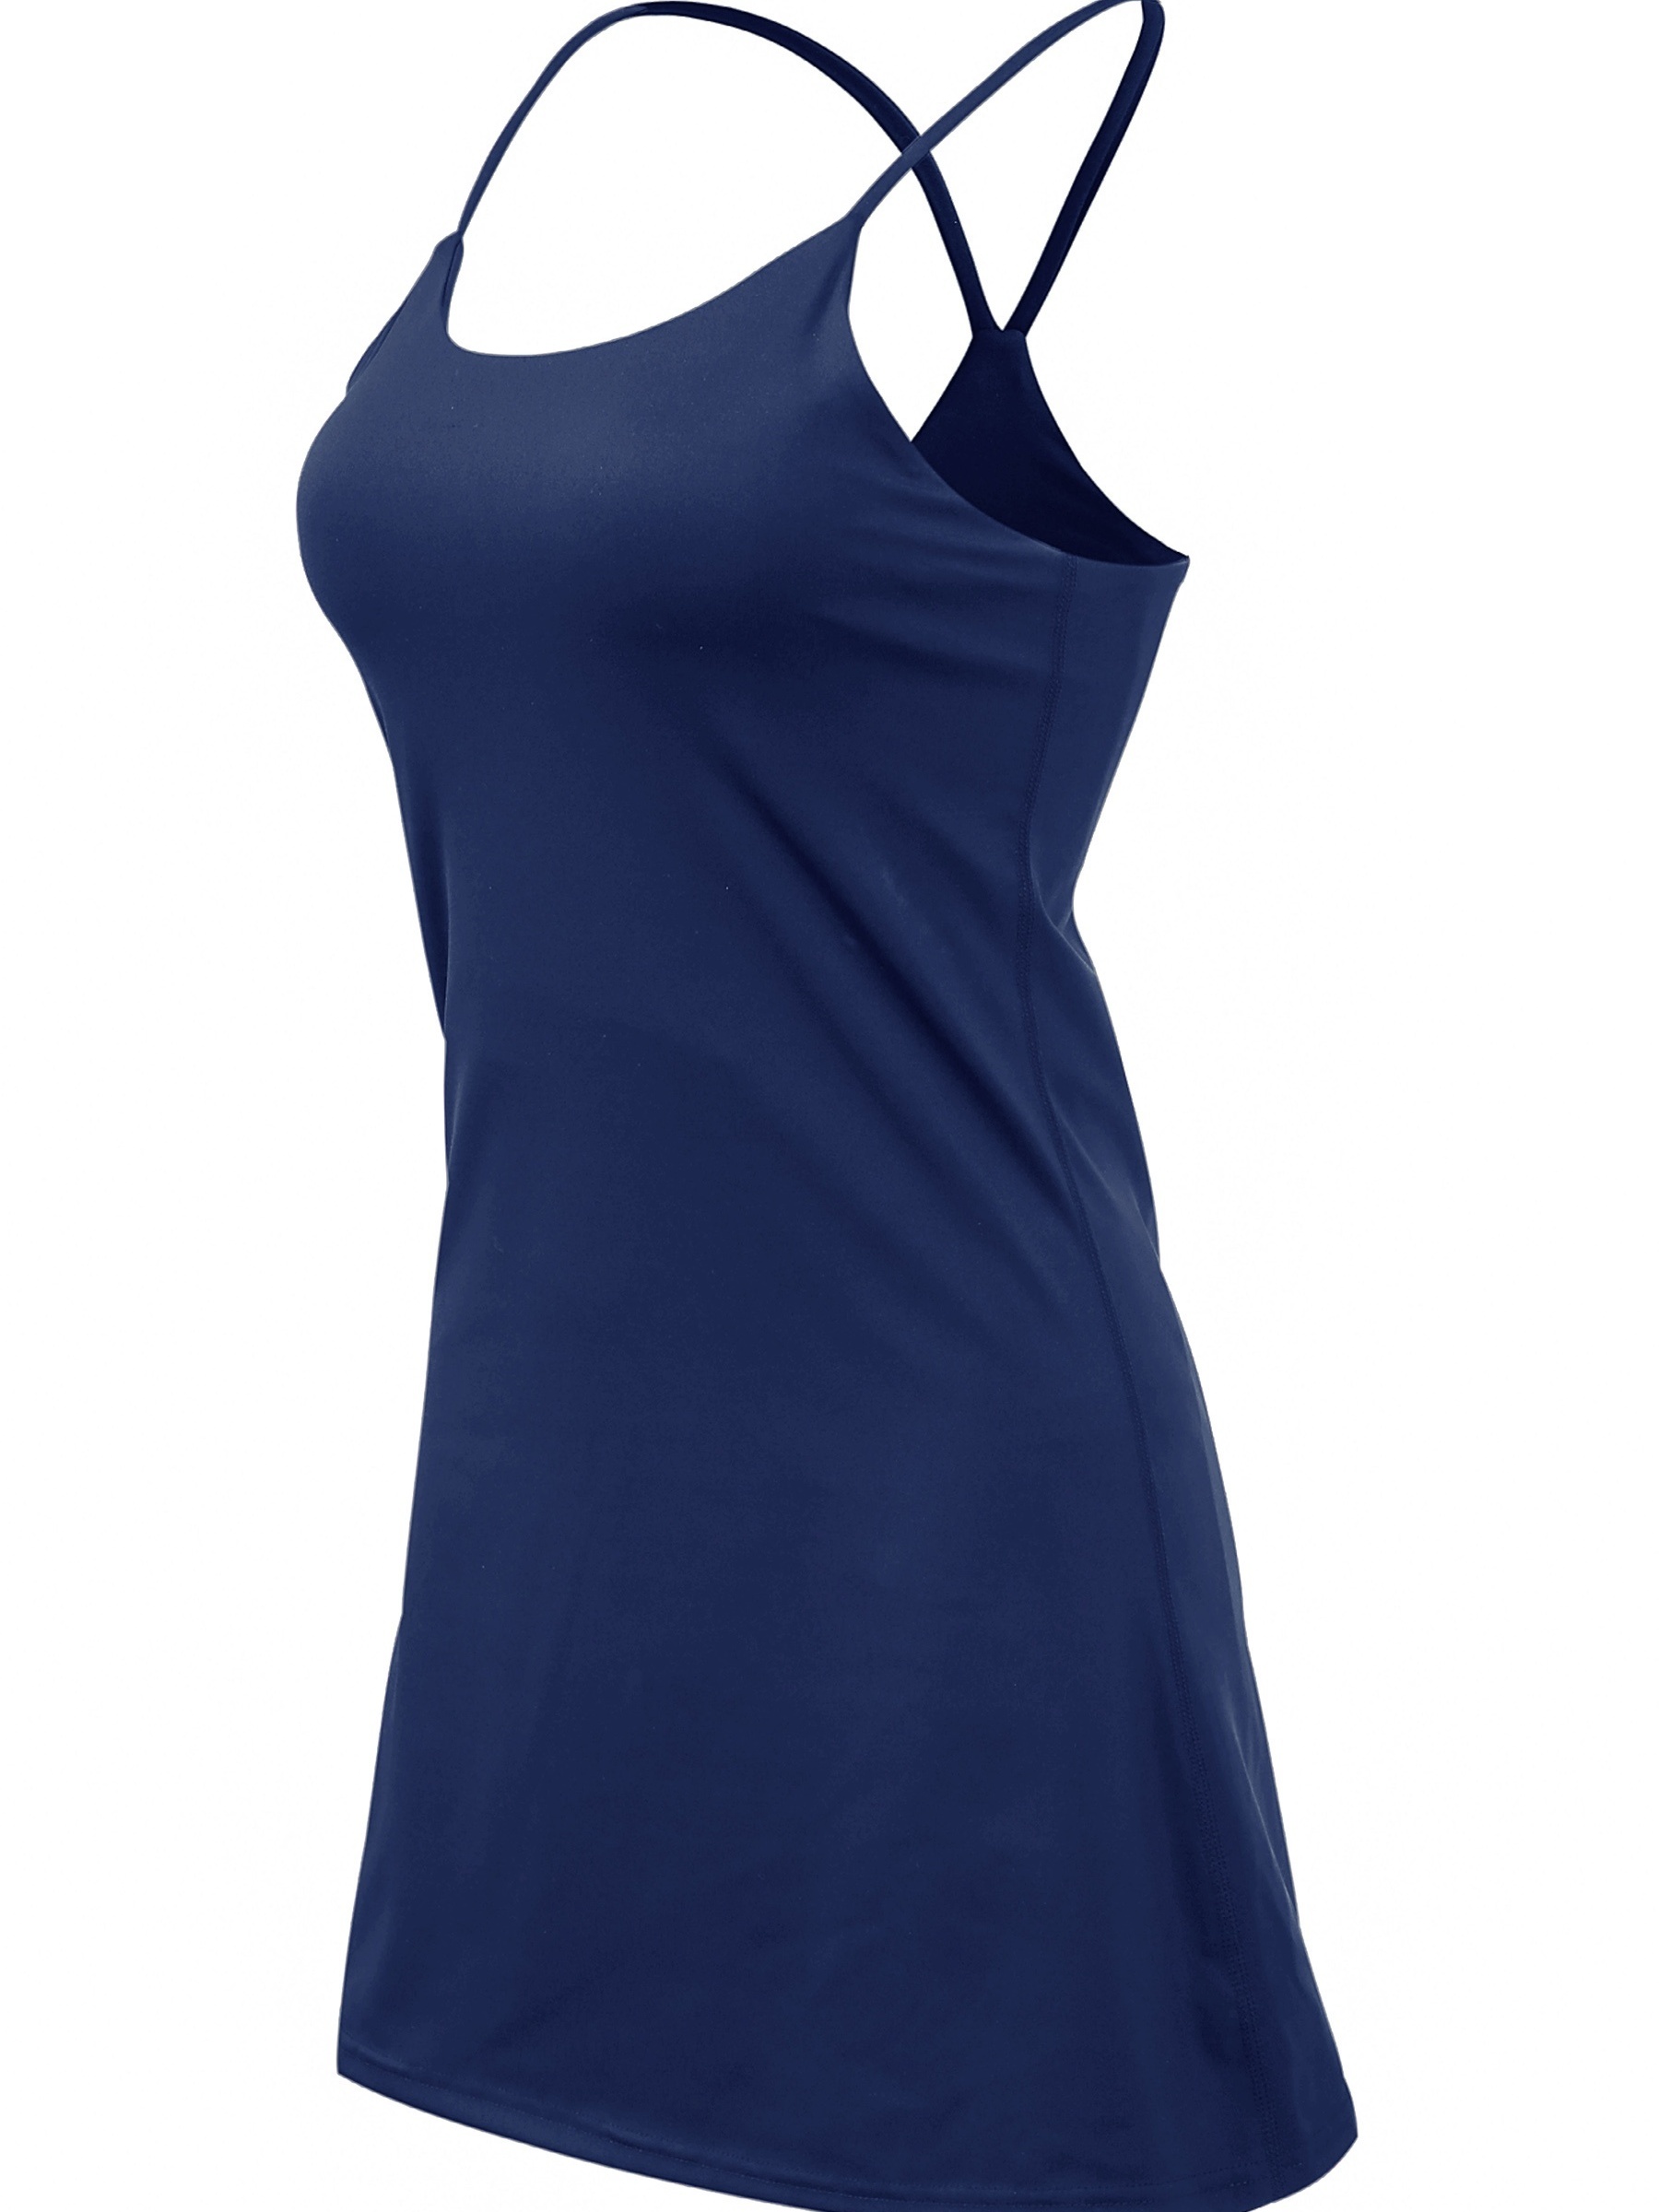 Buy Women's Tennis Dress, Workout Golf Dress Built-in with Bra & Shorts  Pocket Sleeveless Athletic Dresses, Royal Blue, Small at